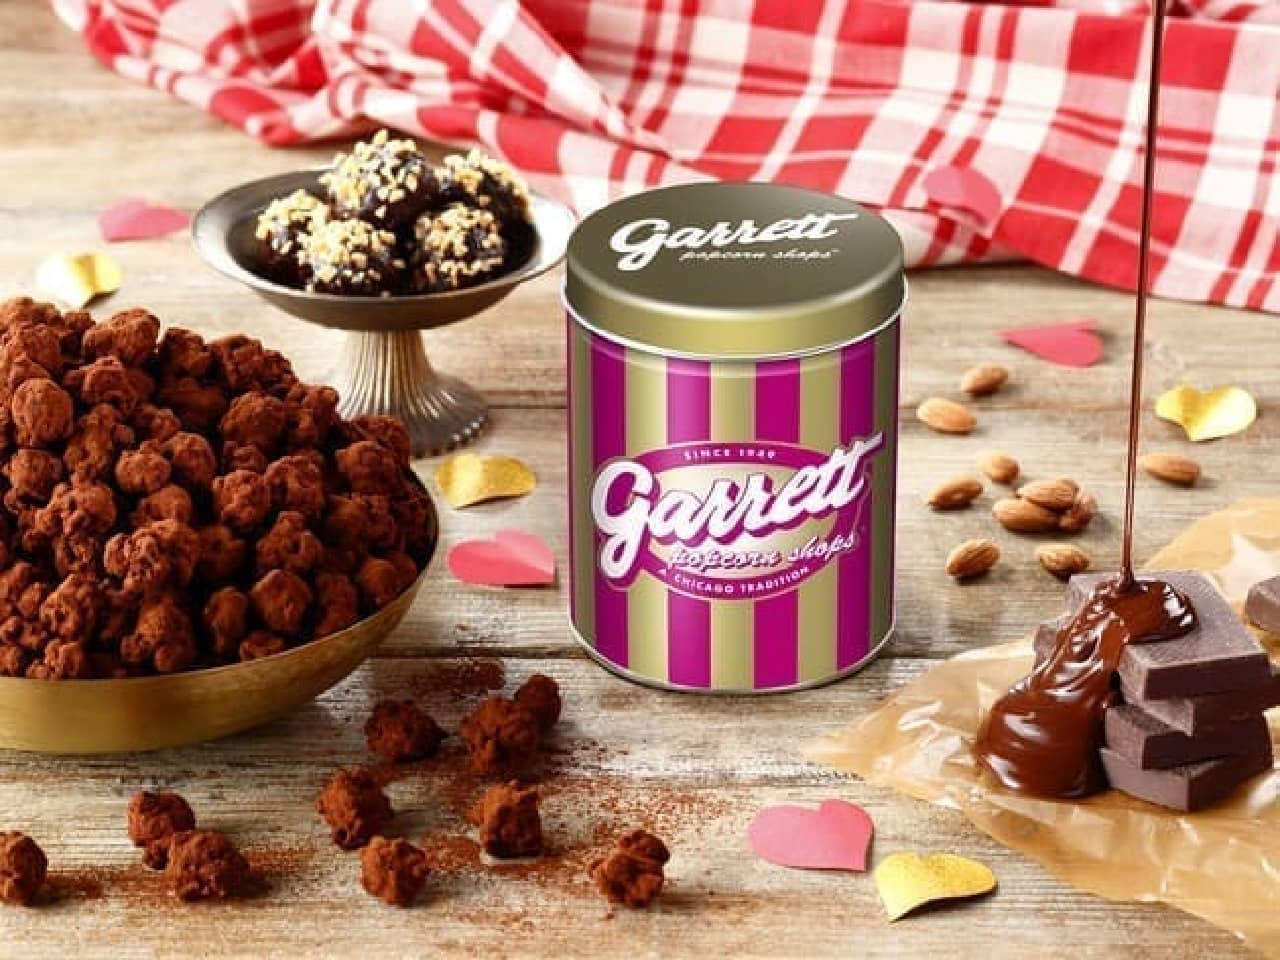 Garrett Popcorn Shops "Almond Chocolate Truffles" and "Candy Pink Cans"